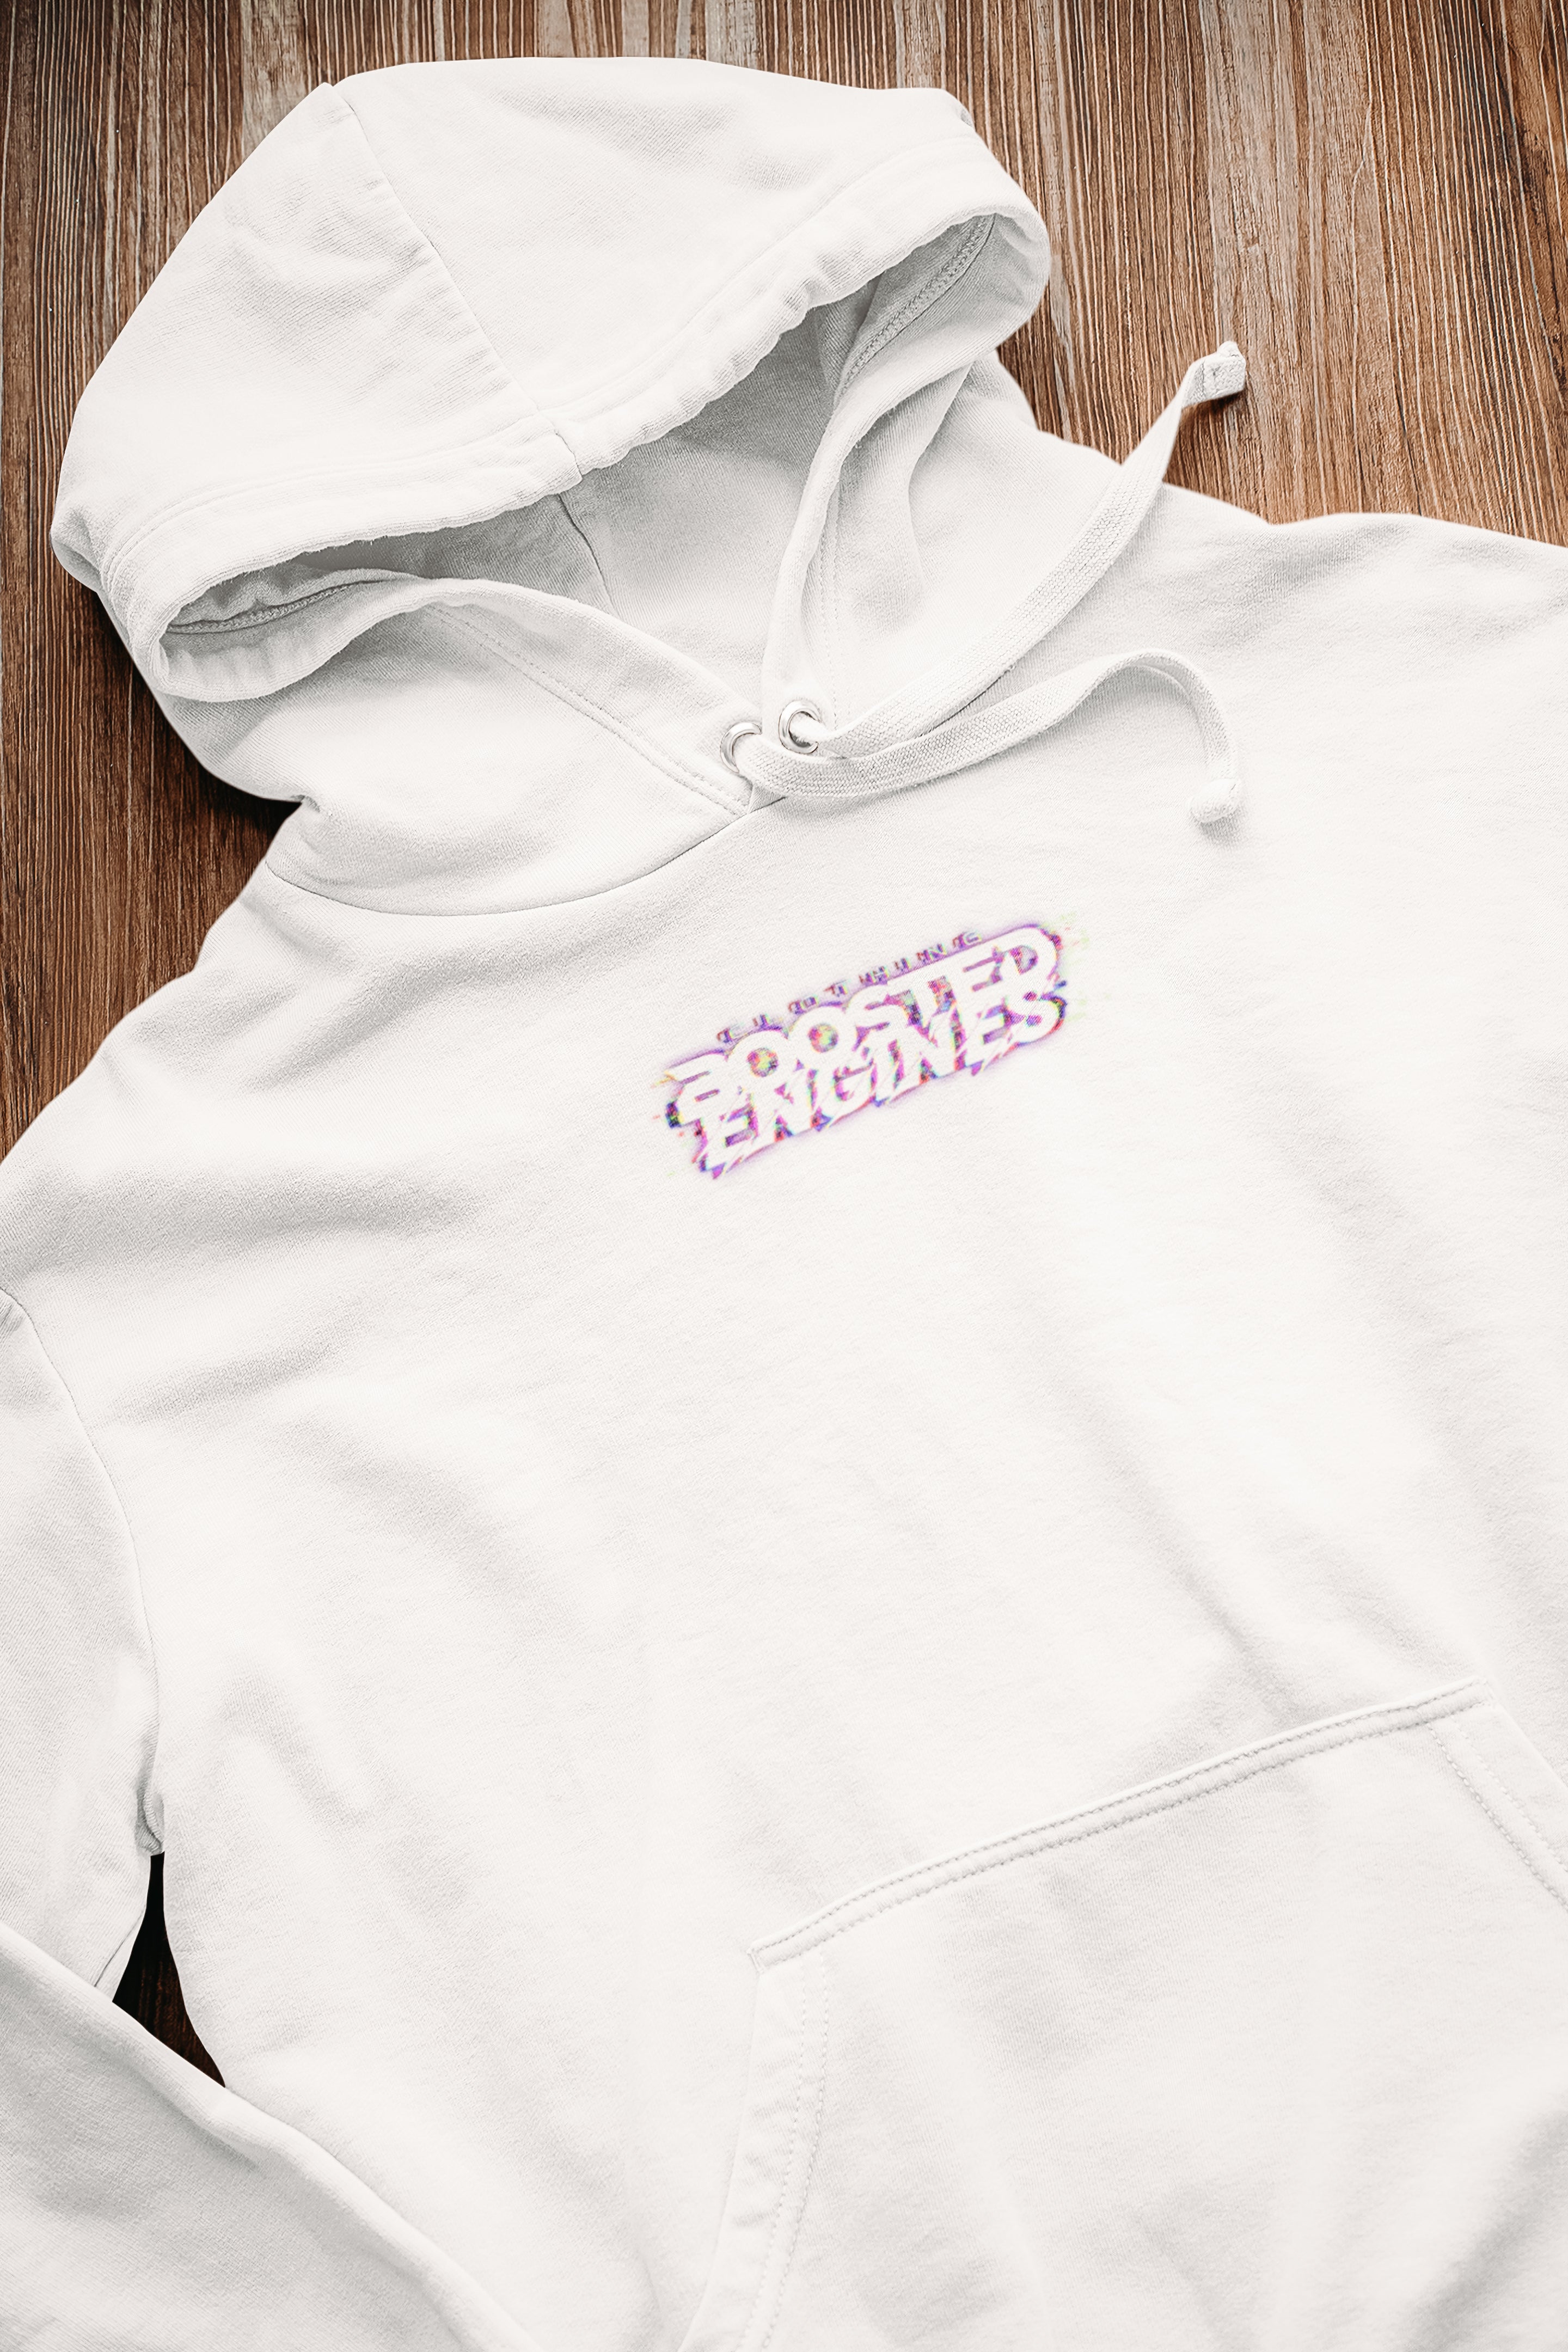 BOOSTED ENGINES ''GLITCH BRAND LOGO'' MEN'S HOODIE